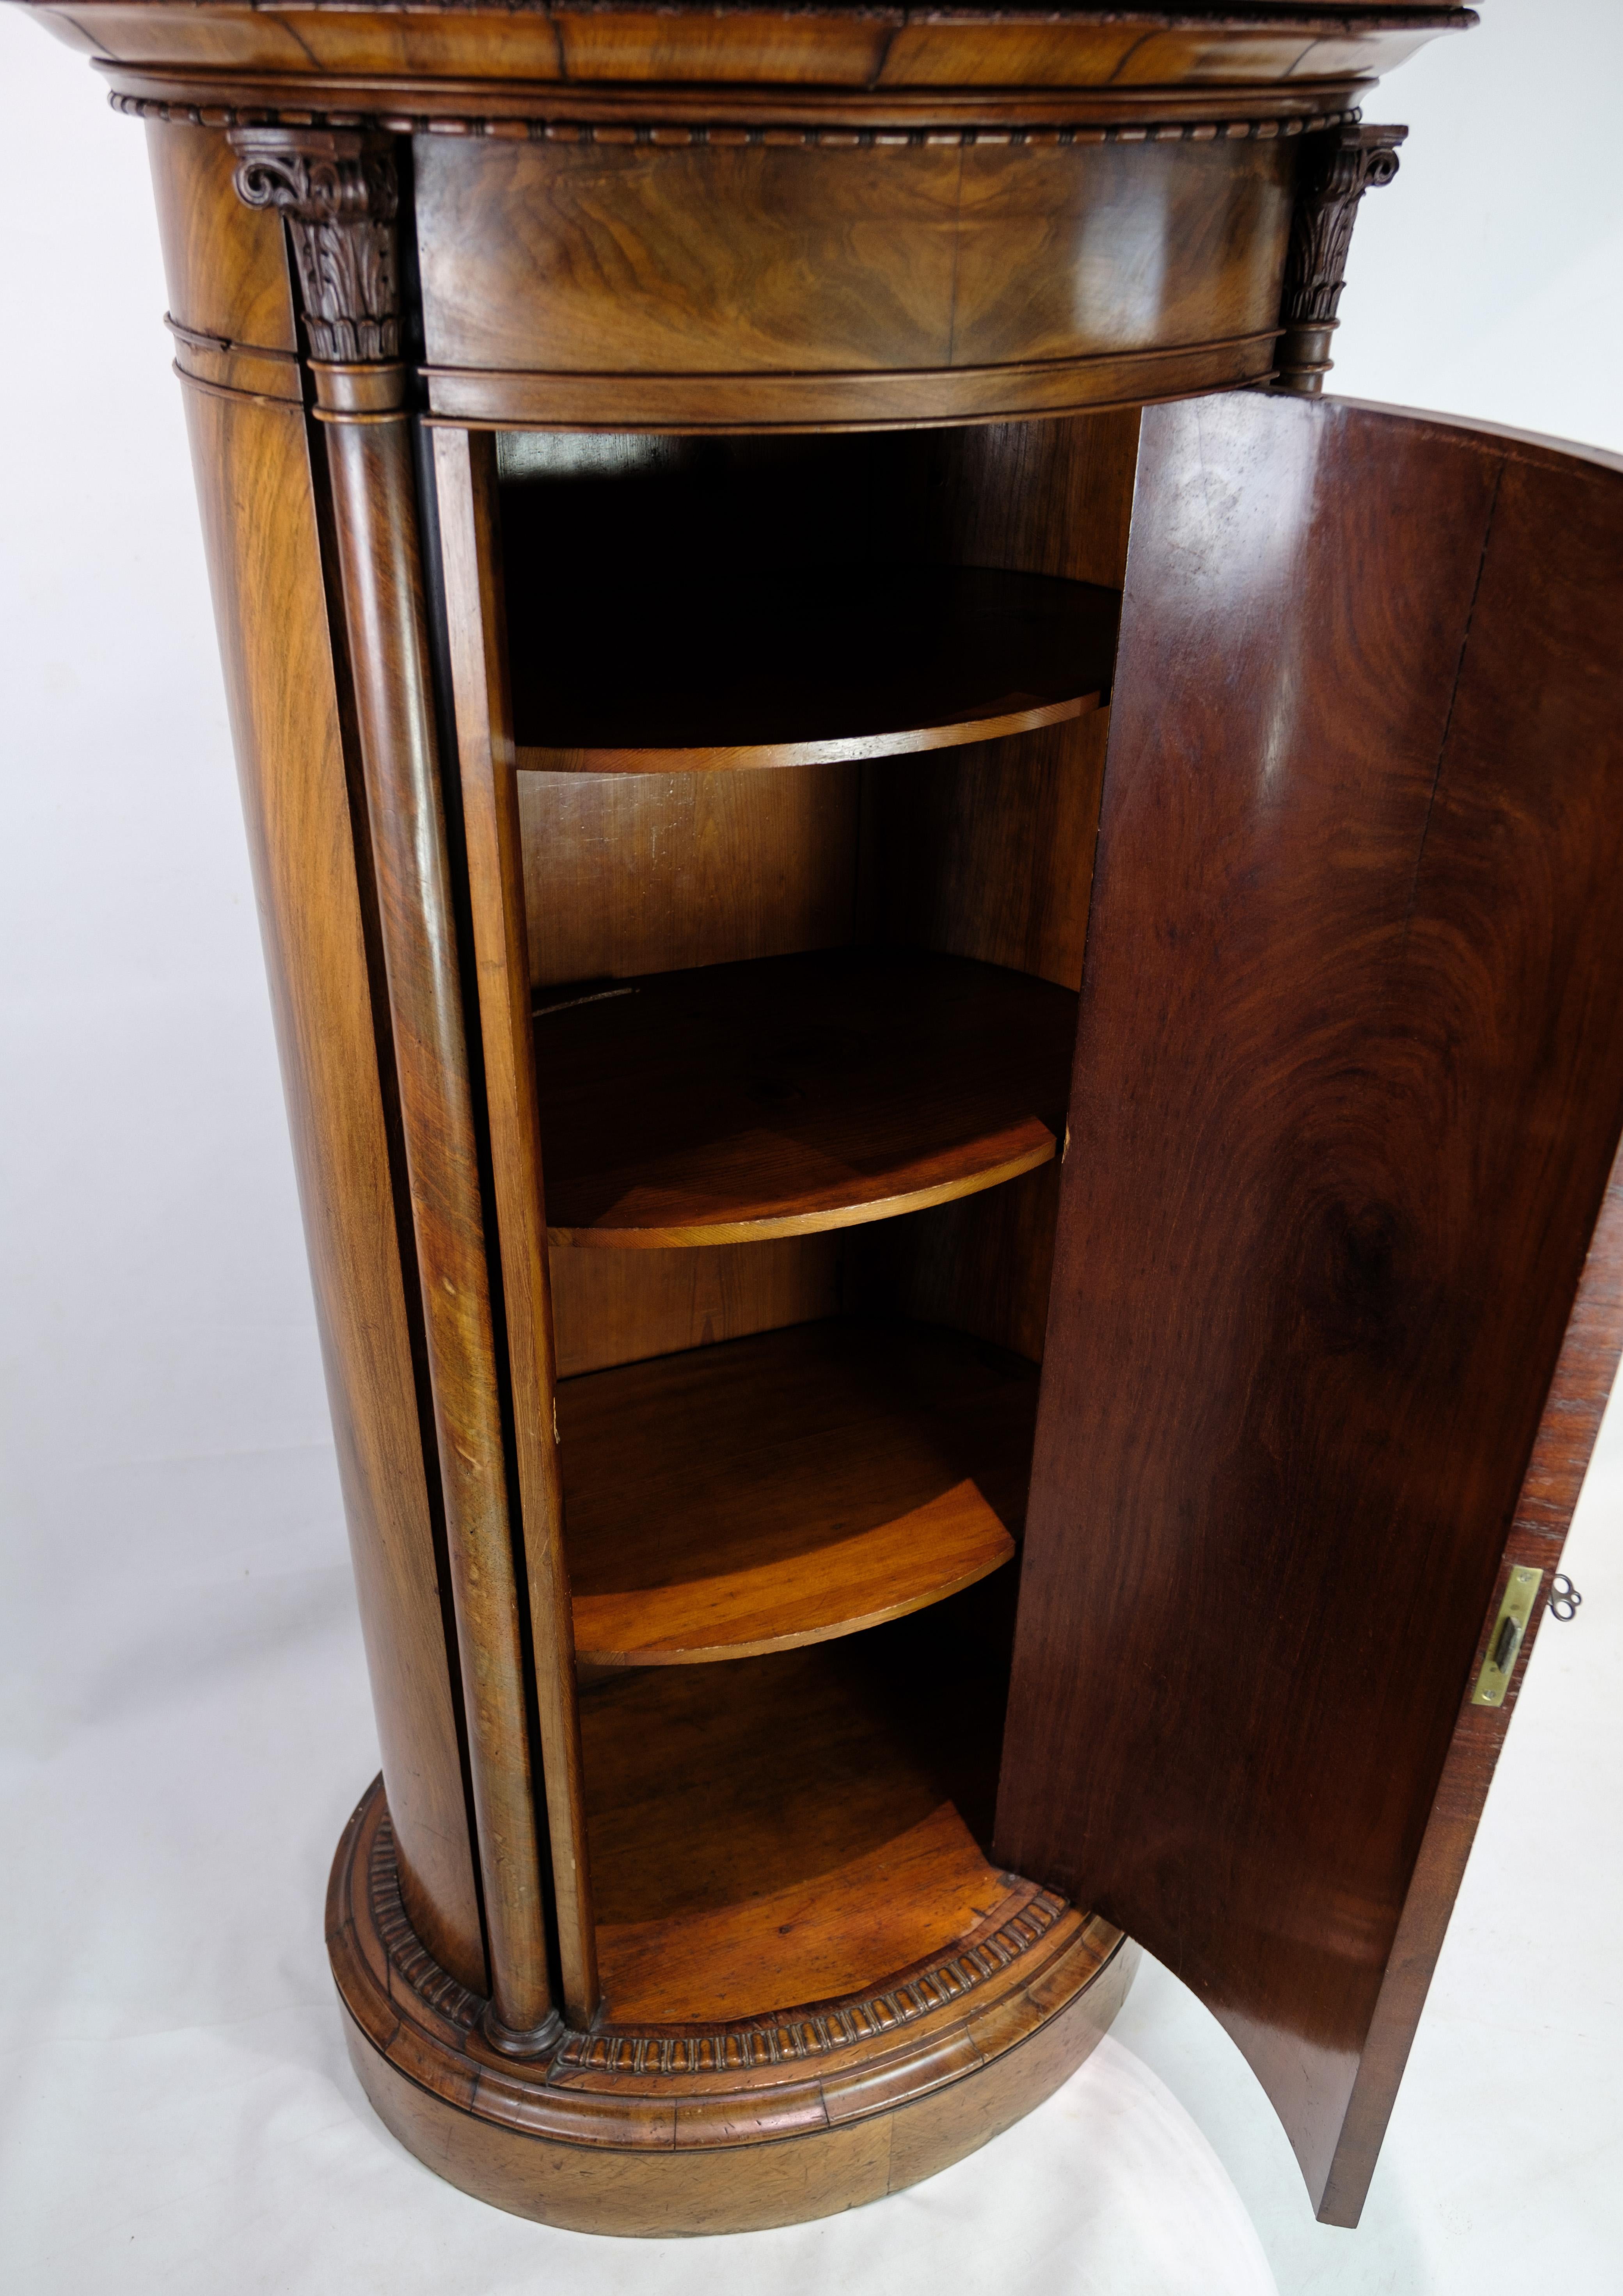 Oval pedestal cabinet decorated with mahogany carvings from around the 1820s.
Measurements in cm: H:143 W:71 D:44